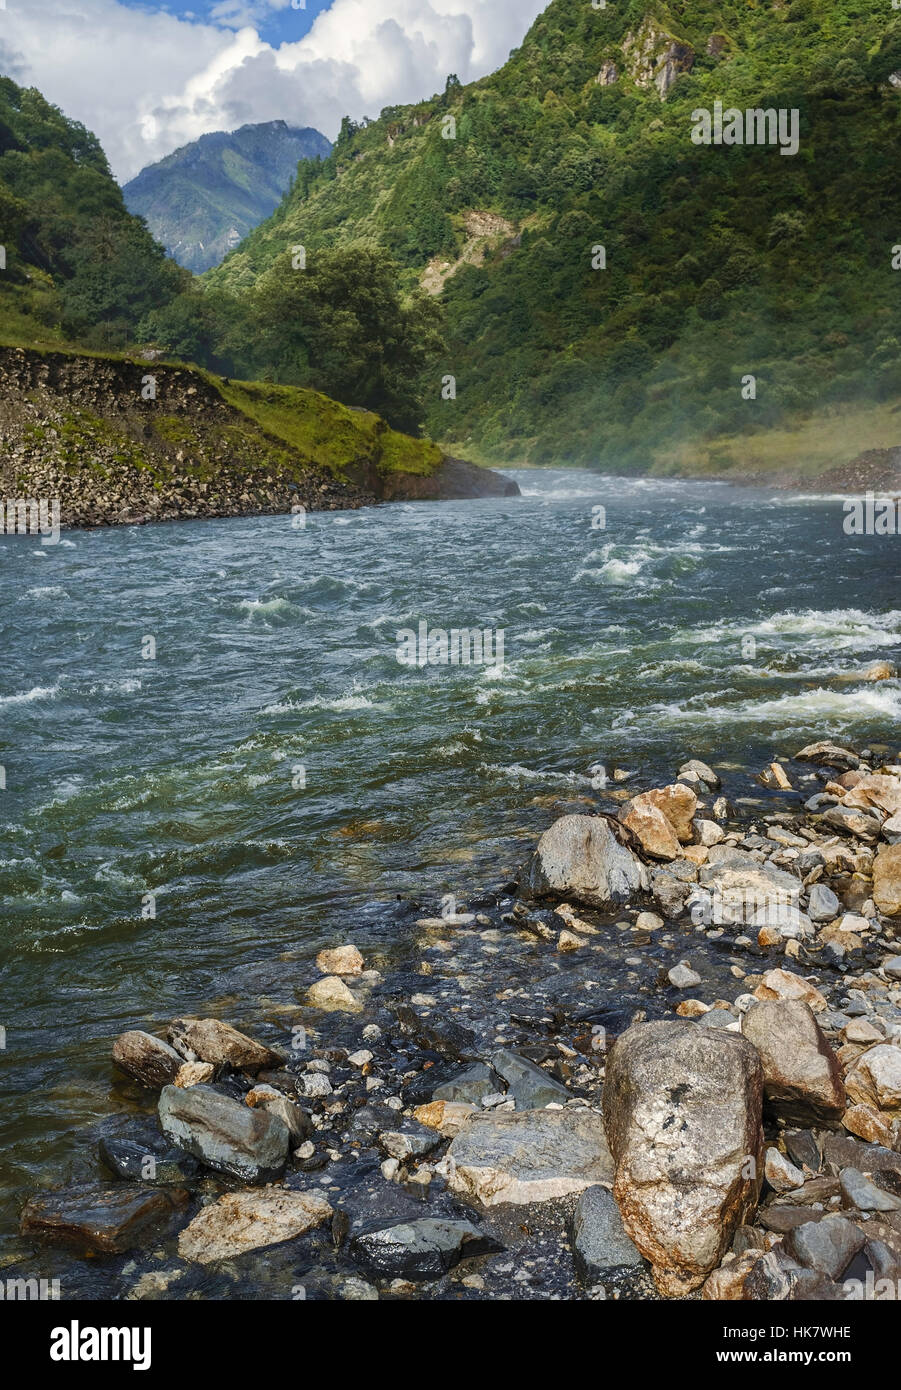 Kameng river snakes between forested slopes of the Himalaya mountains with view of the river bank in the monsoon season. Stock Photo